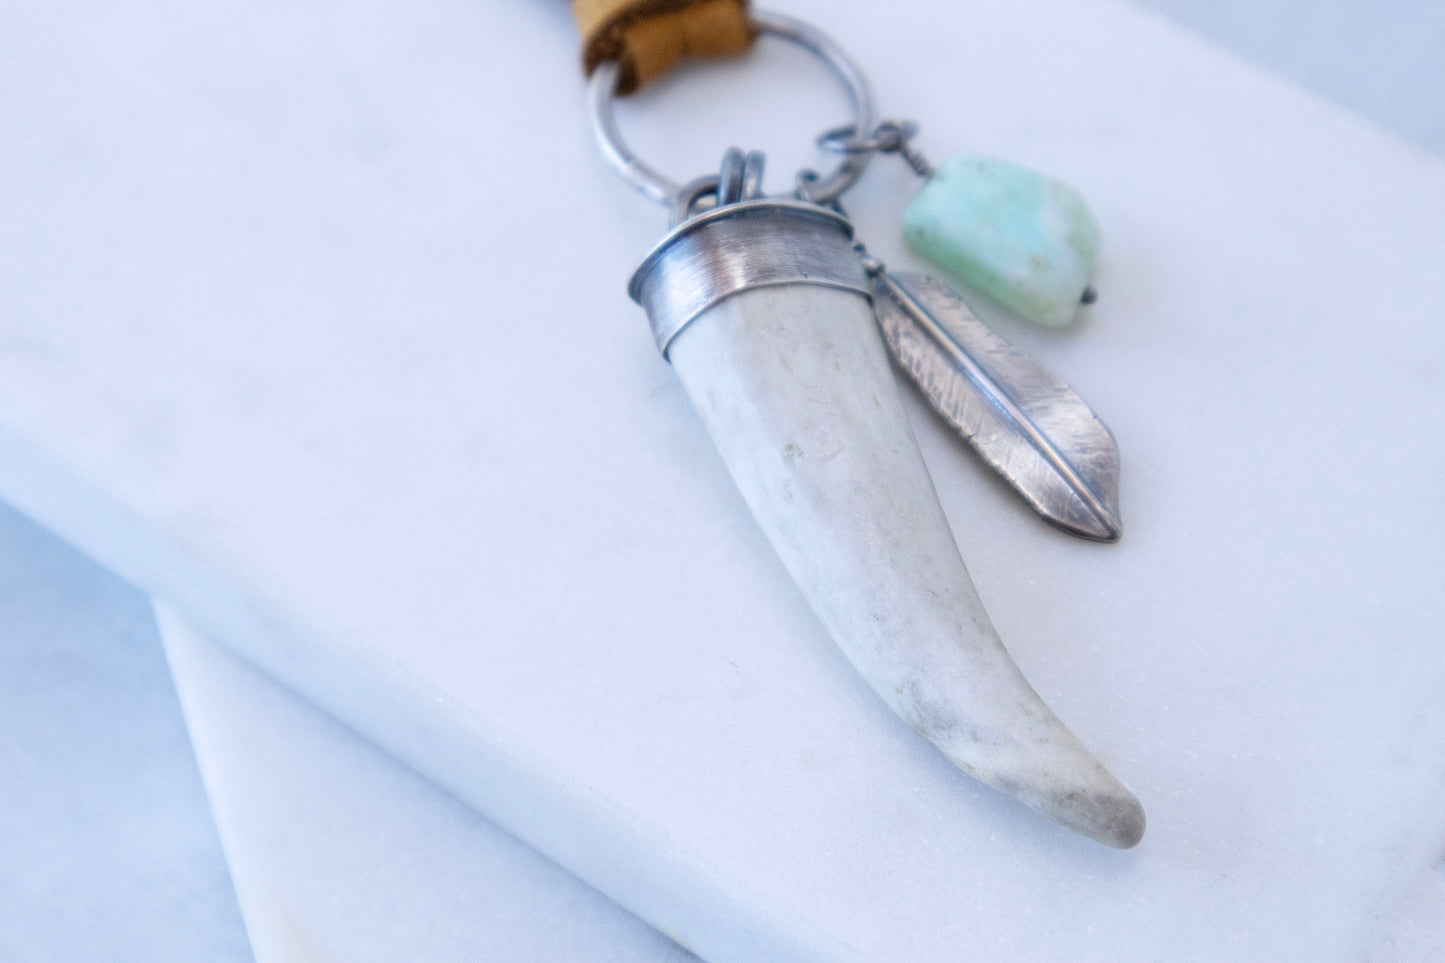 Elements Charm Necklace with Antler, Chrysoprase, Oxidized Silver, and Leather